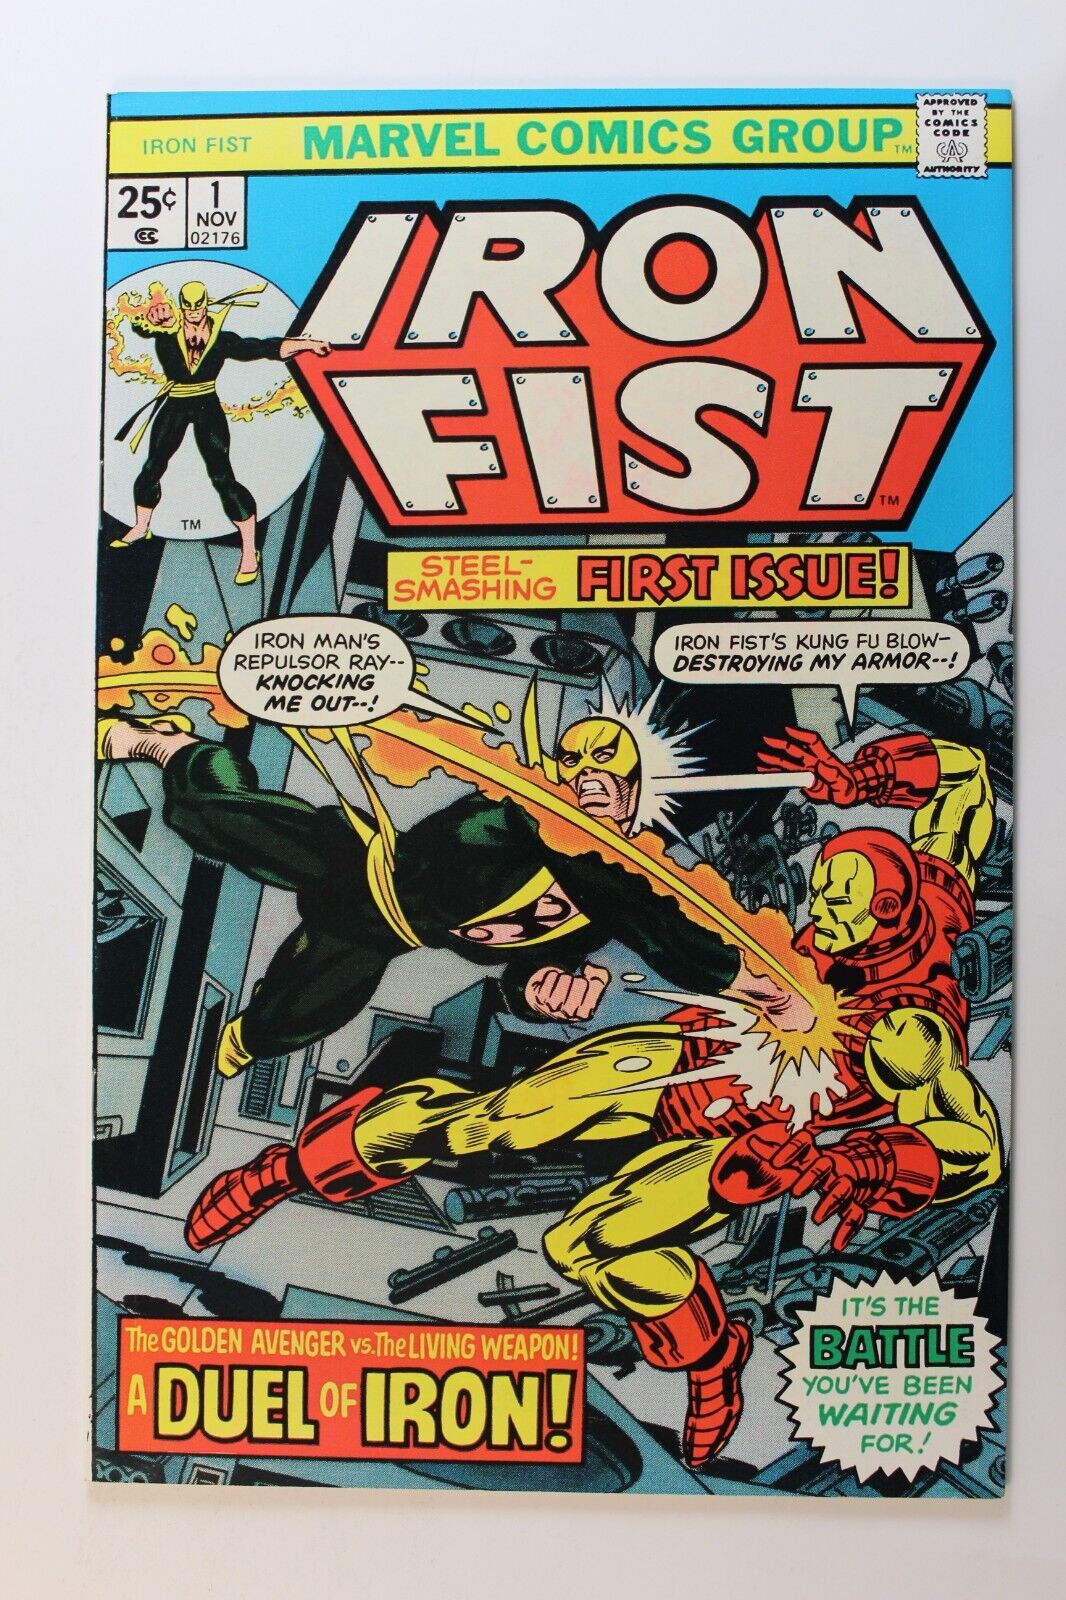 IRON FIST #1  A DUEL OF IRON (This comic looks brand new) Cover by John Byrne